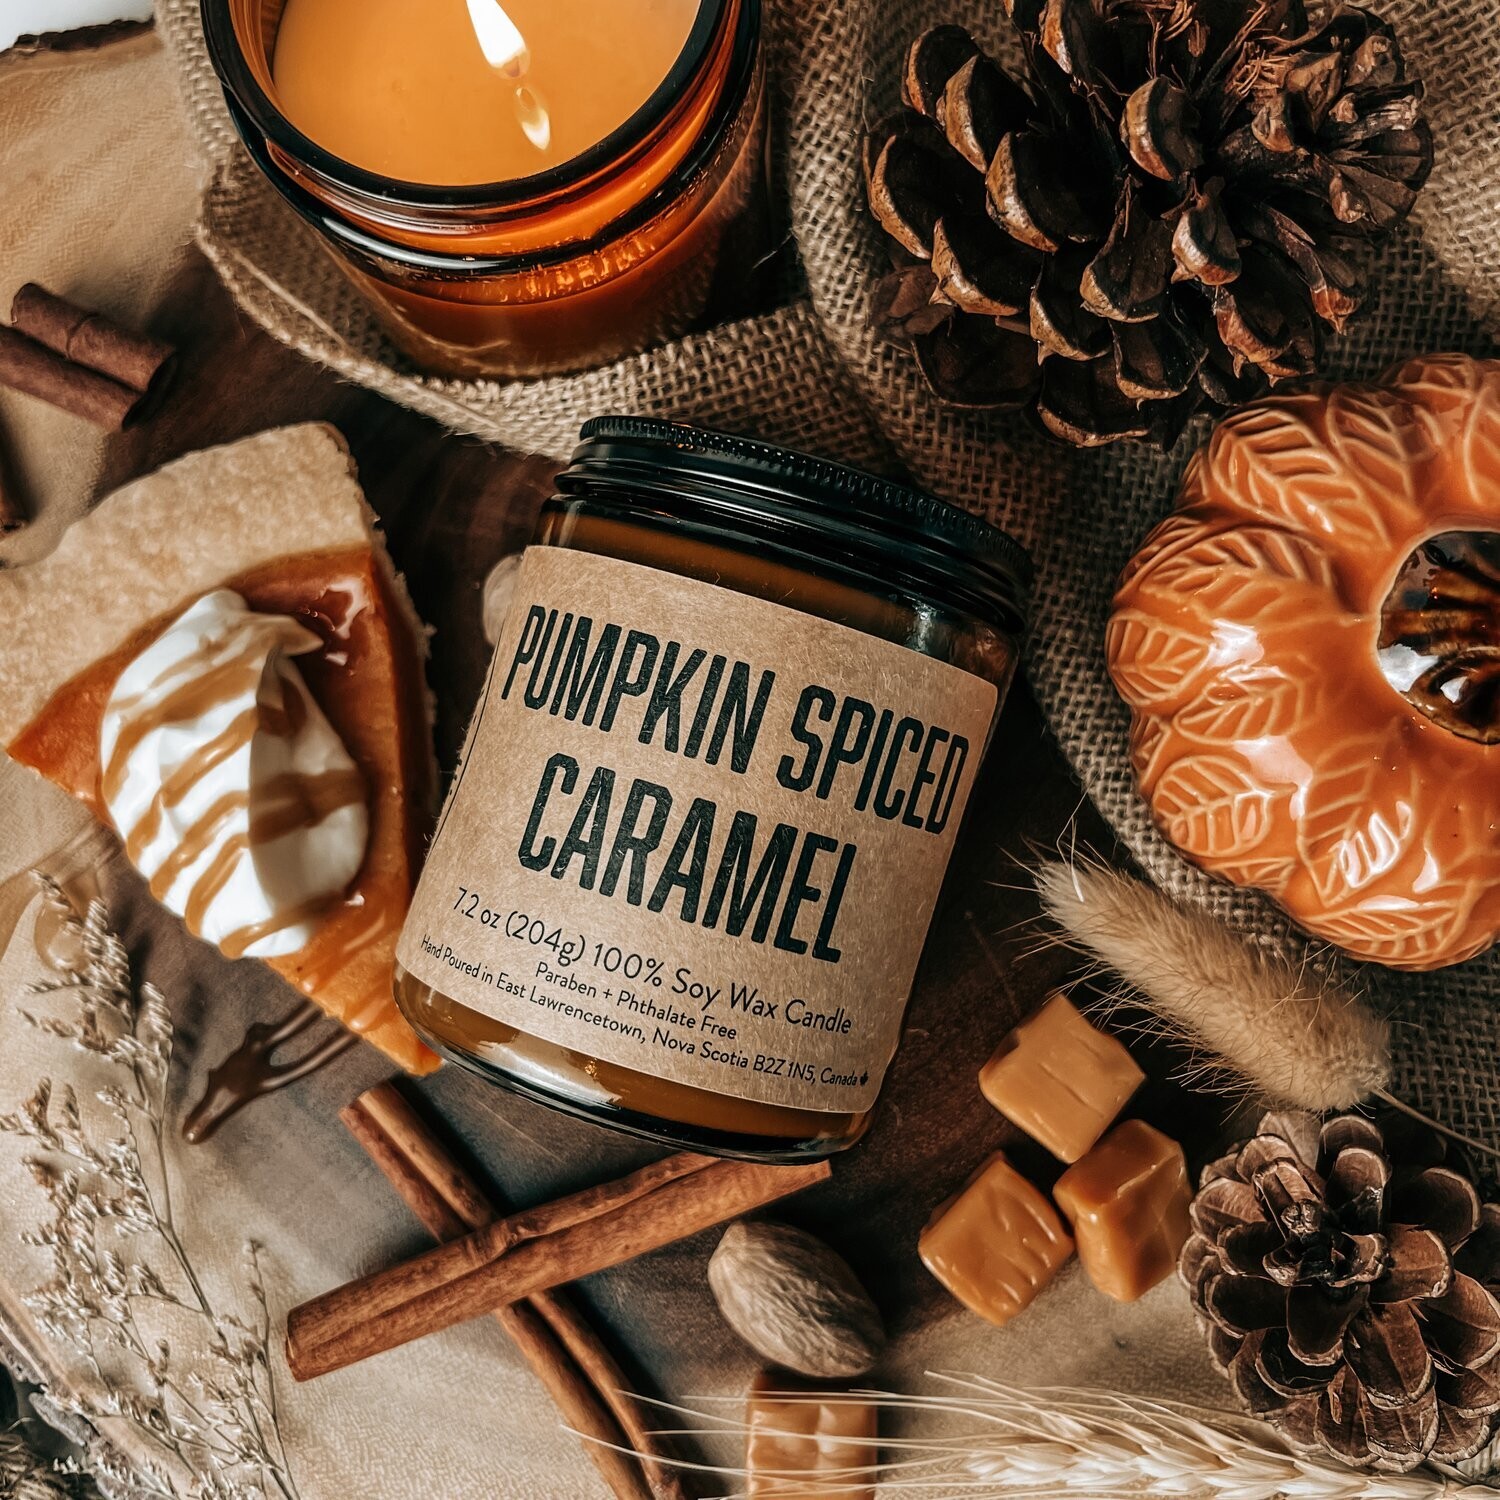 Pumpkin Spiced Caramel - Lawrencetown Candle Co